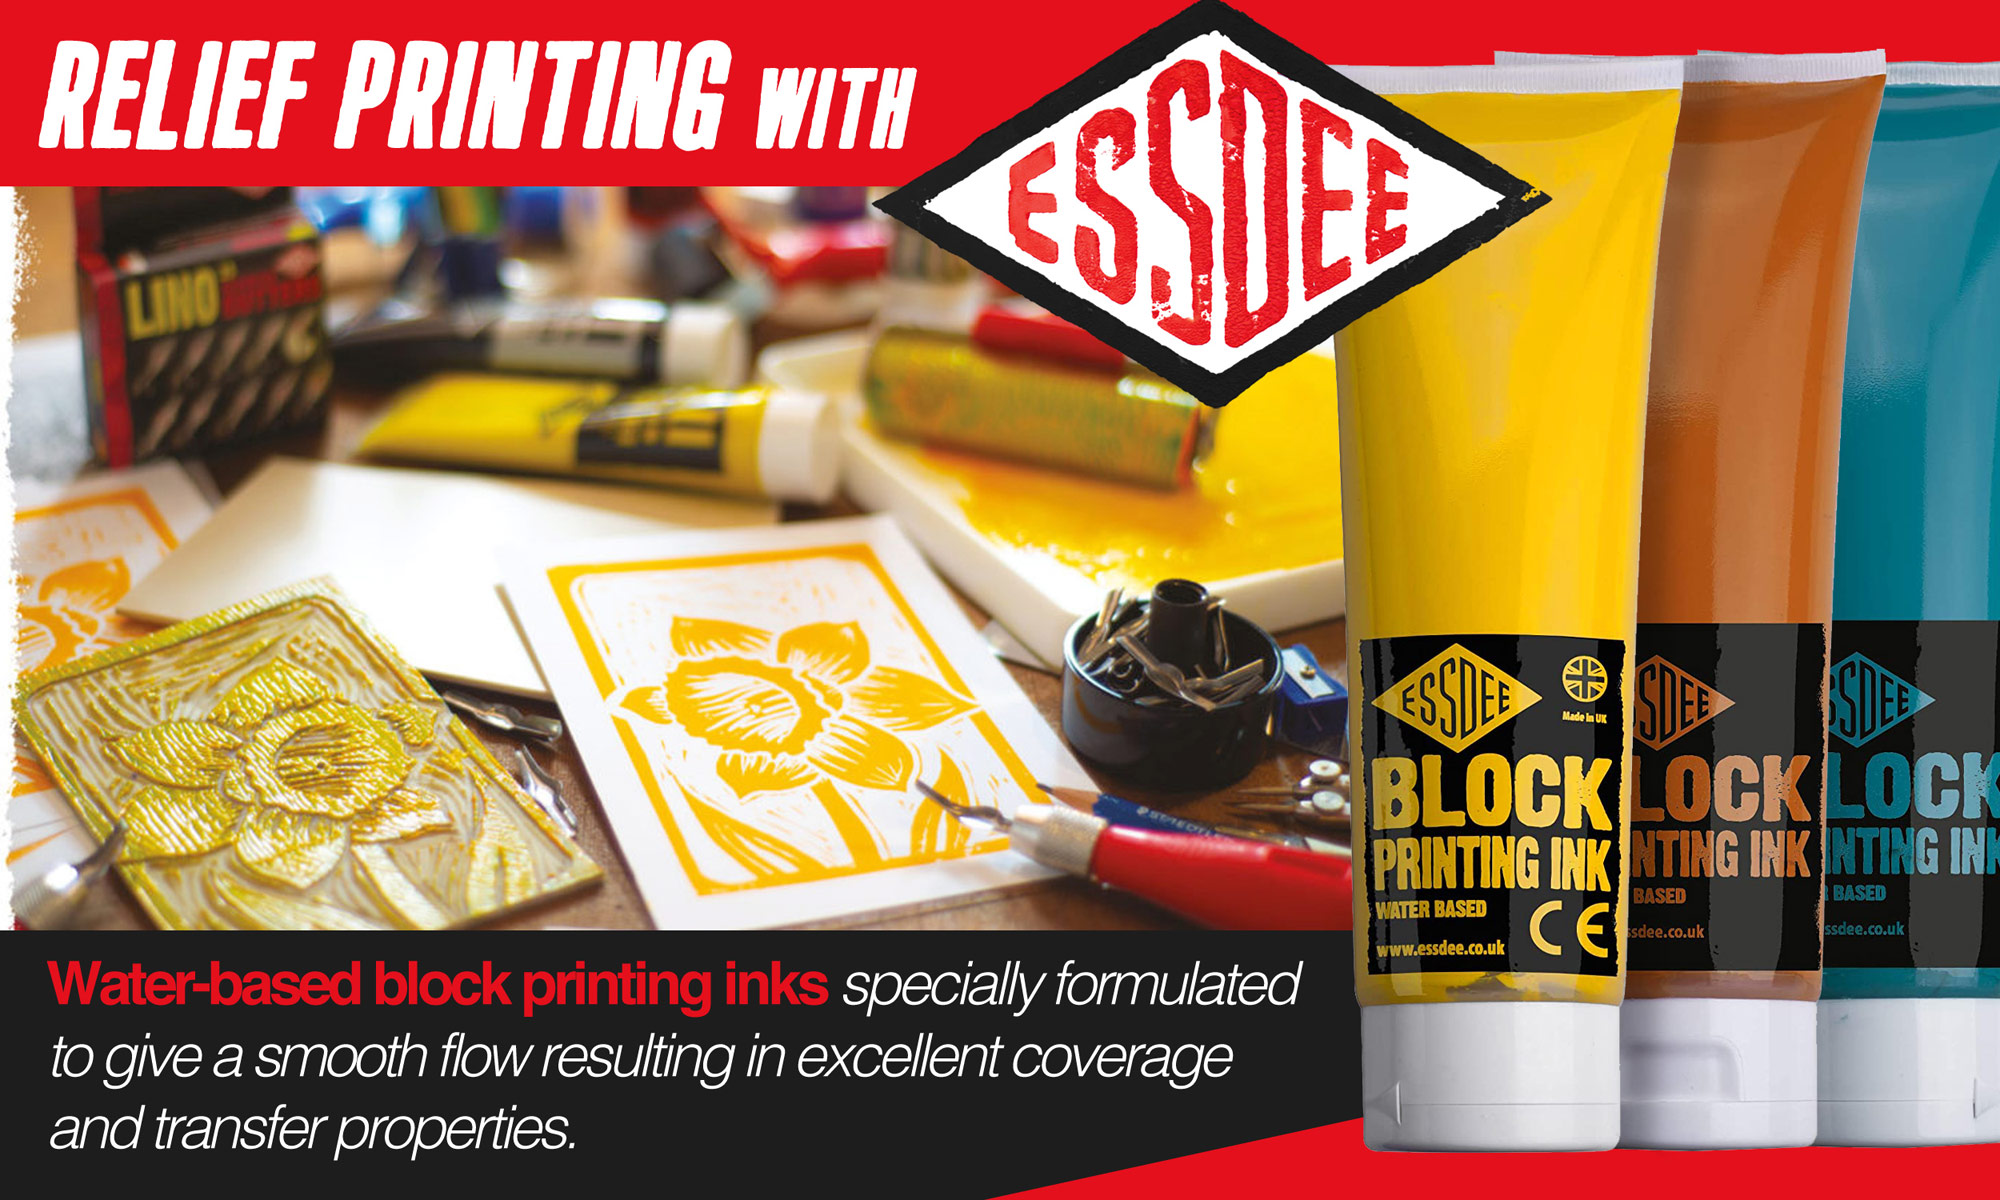 Relief Printing with Essdee. Water-based Block Printing Inks specially formulated to give a smooth fow resulting in excellent coverage and transfer properties.